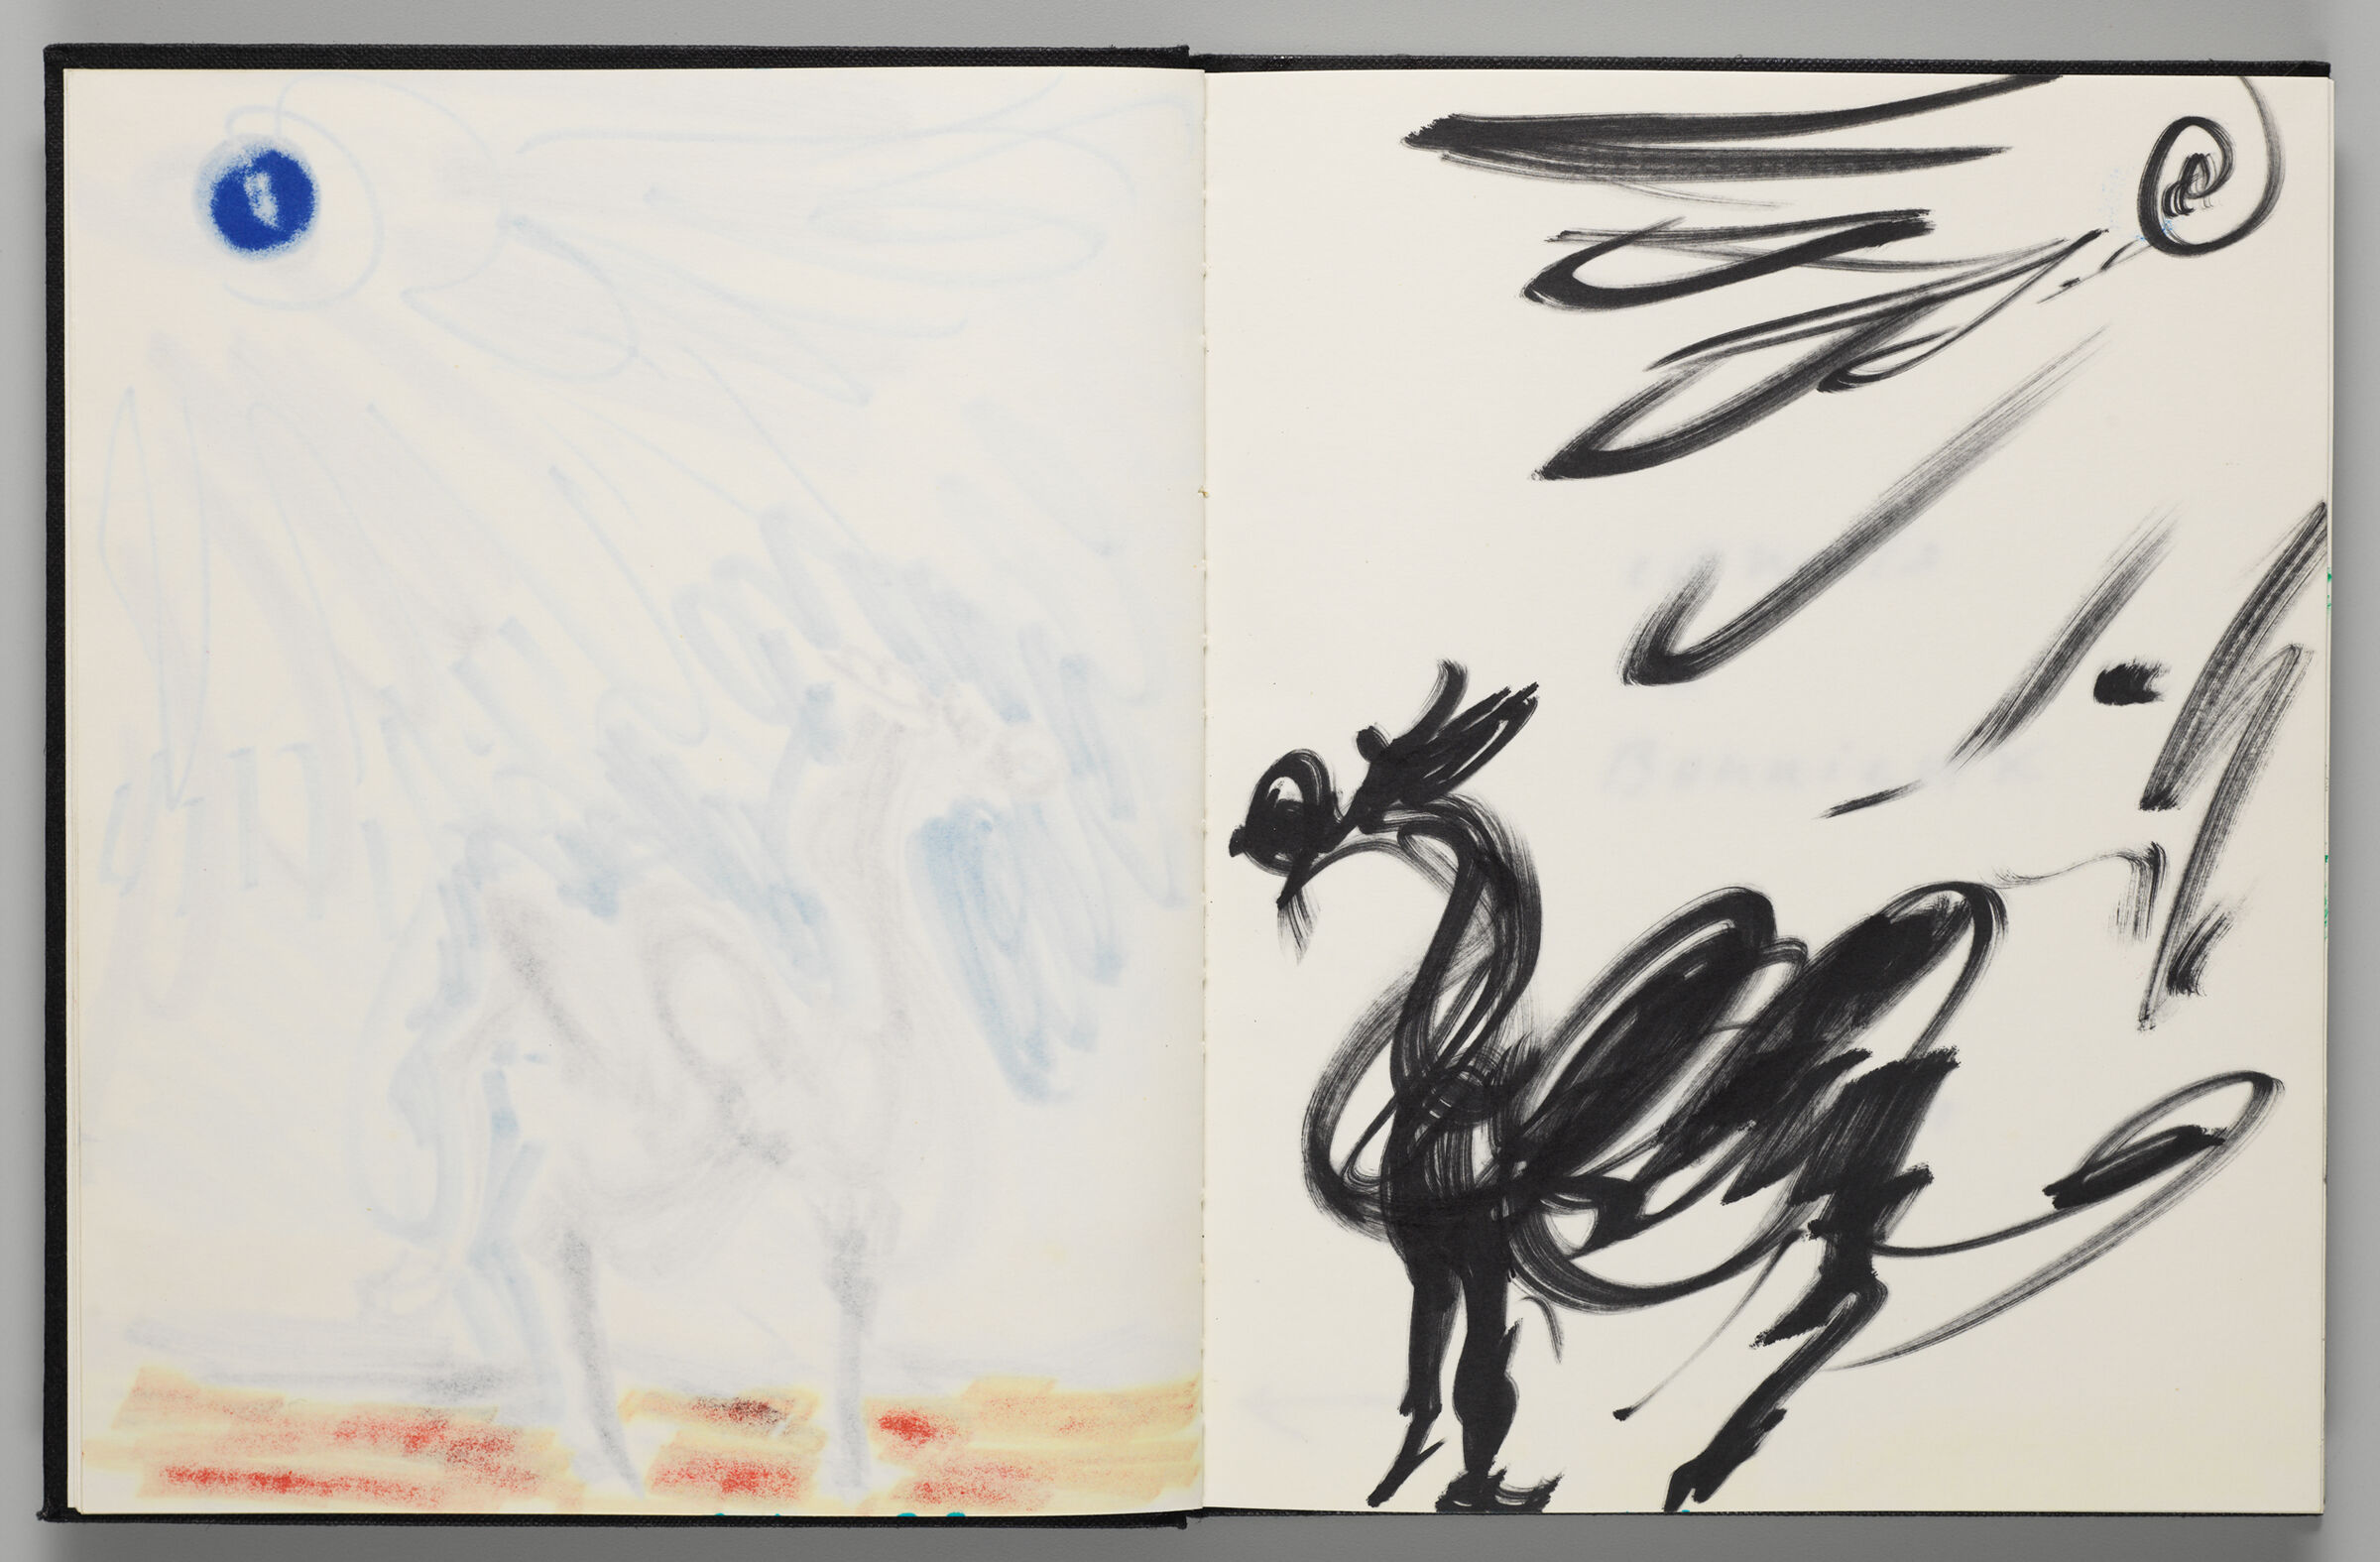 Untitled (Bleed-Through Of Previous Page, Left Page); Untitled (Camel In Landscape, Right Page)